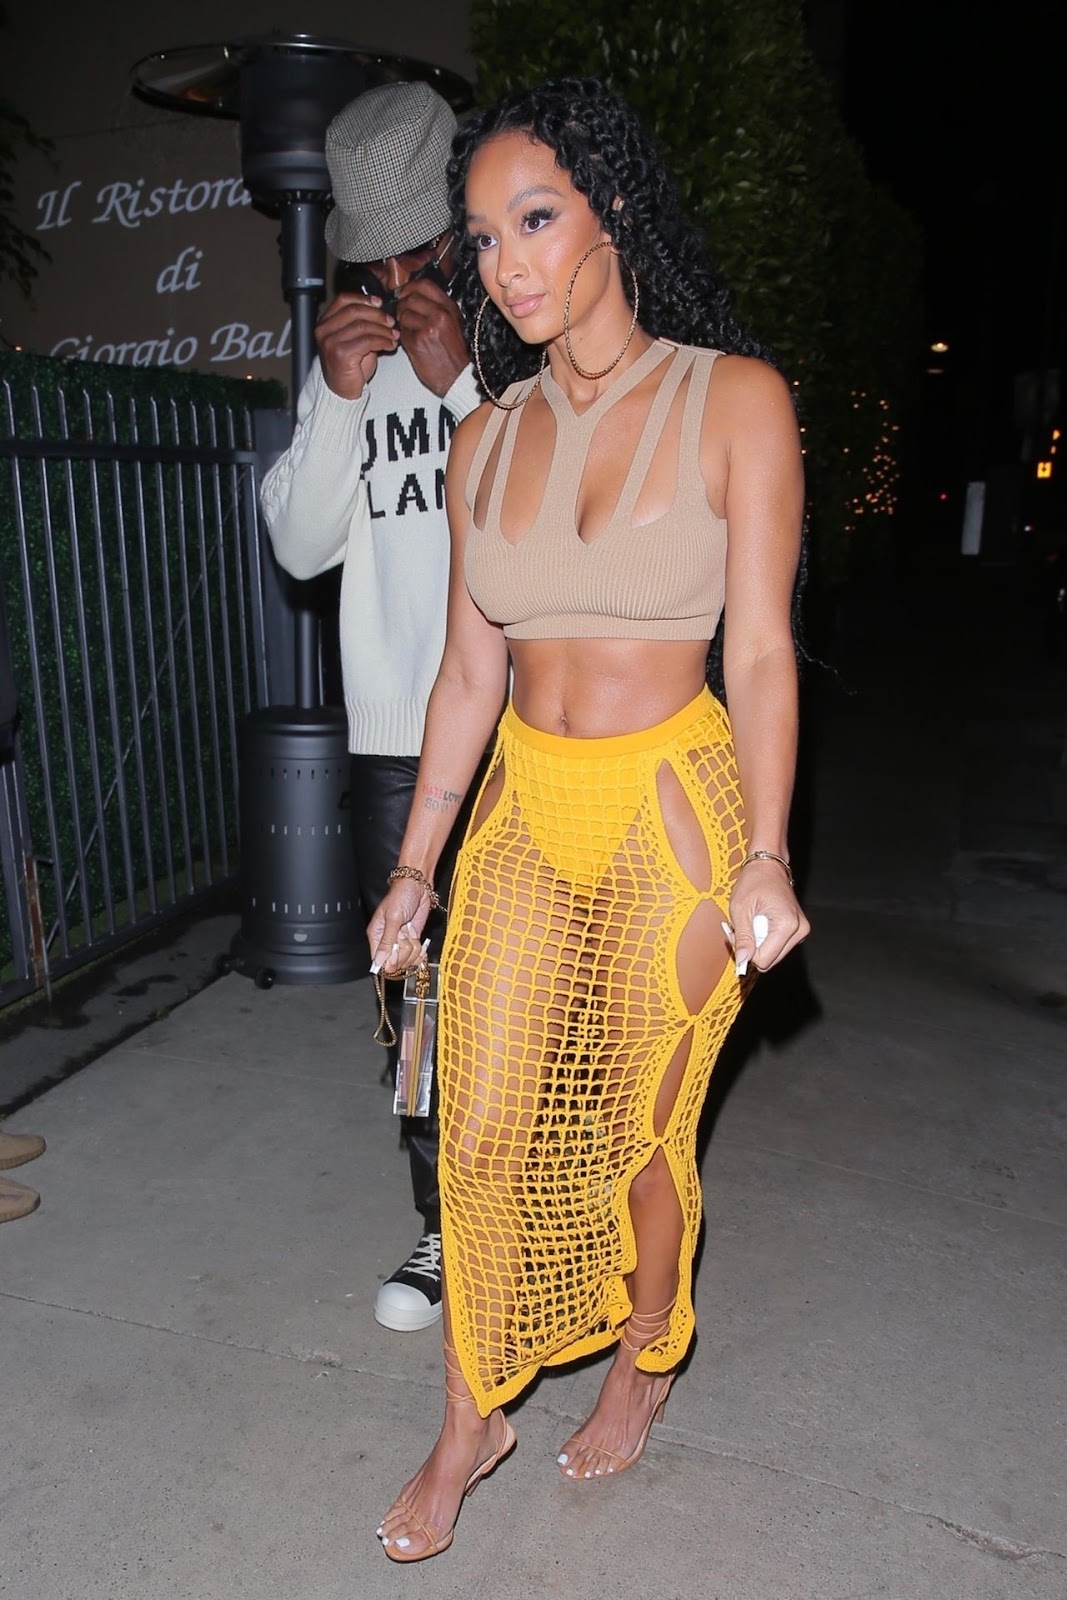 Draya Michele shows her curvy figure in a cropped top and yellow fishnet skirt in Santa Monica.